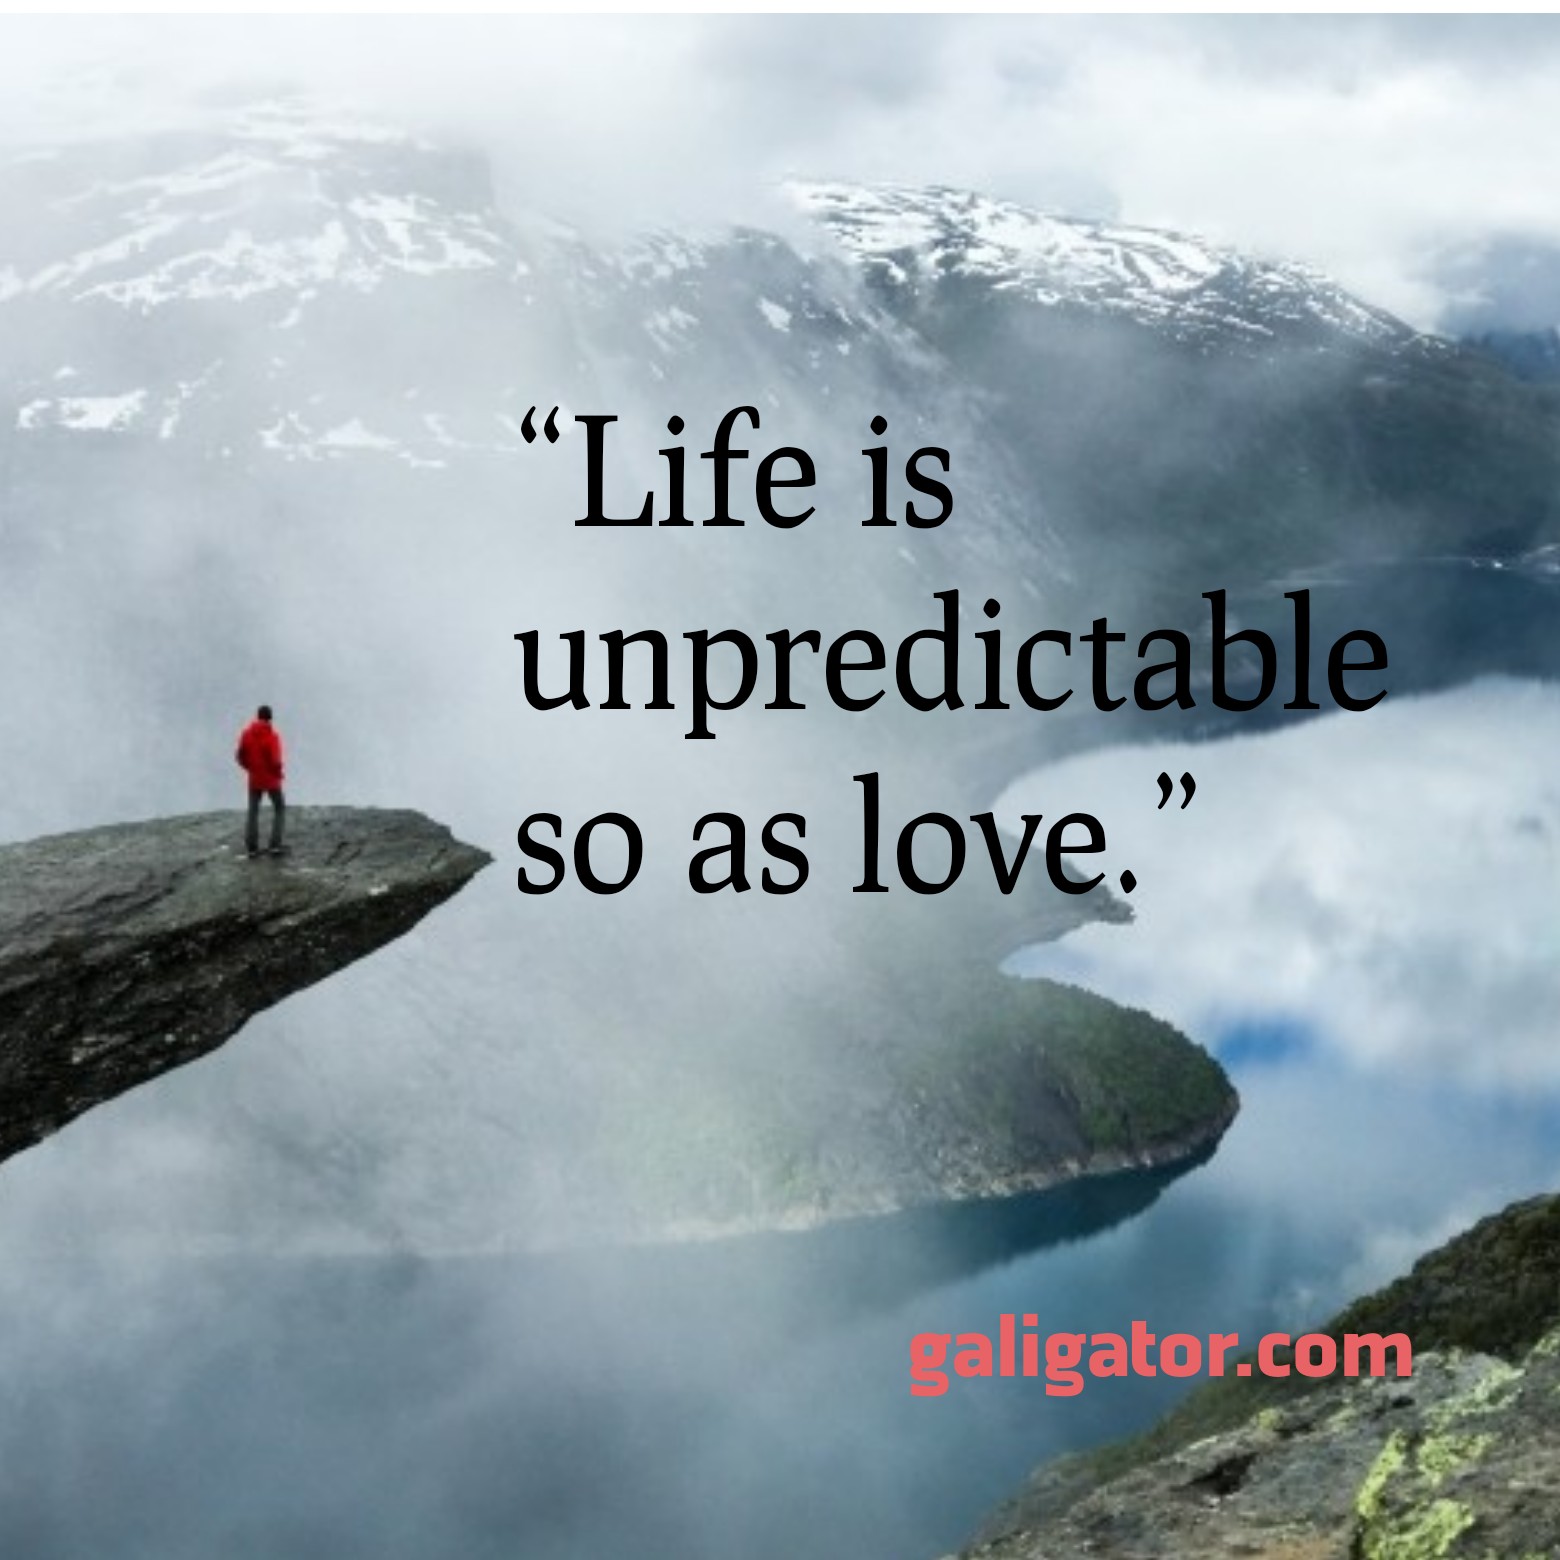 life can be so unpredictable quotes, quotes about being unpredictable , quotes about unpredictable person, life is totally unpredictable , life is so unpredictable , unpredictable love quotes , unpredictable future quotes, predictably unpredictable quote  ,Future Is Unpredictable Quotes,Life Is Totally Unpredictable Life Is Totally Unpredictable,life is unpredictable quotes , life is unpredictable quotes by gautam buddha , Life Is Unpredictable Sad Quotes,Quotes On Life Is Unpredictable,life can be so unpredictable quotes life can be so unpredictable quotes